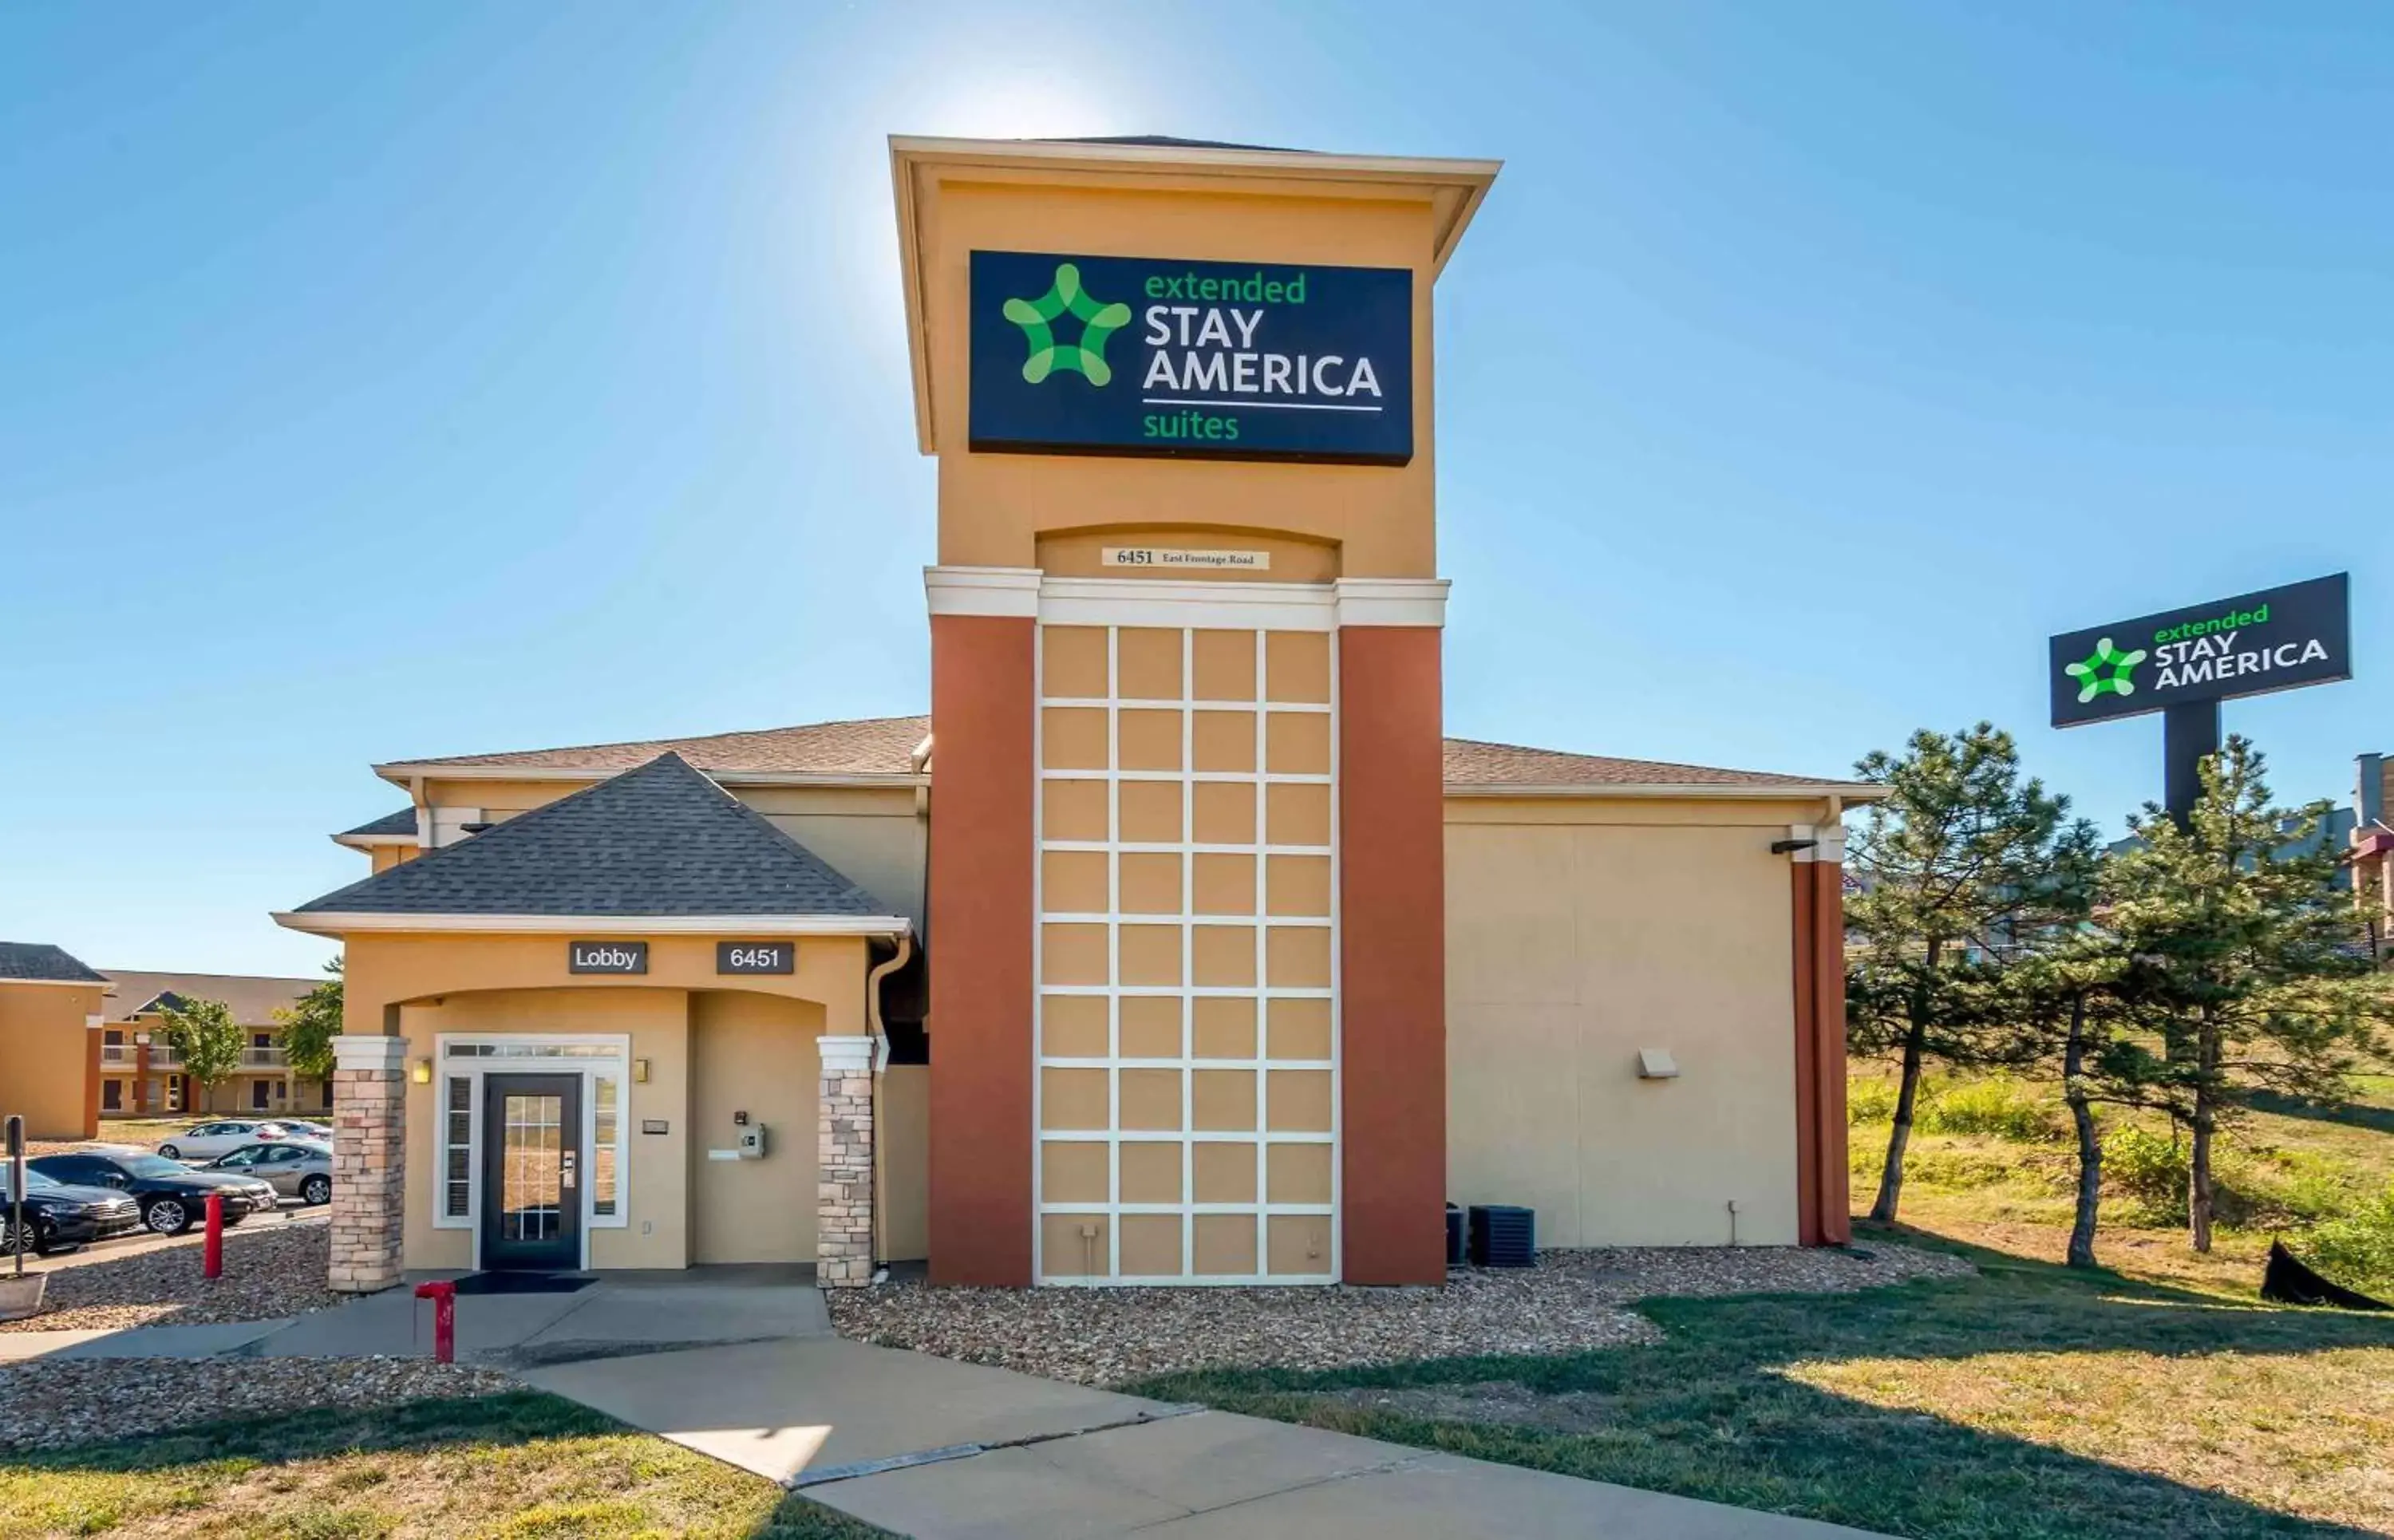 Property Building in Extended Stay America Suites - Kansas City - Shawnee Mission